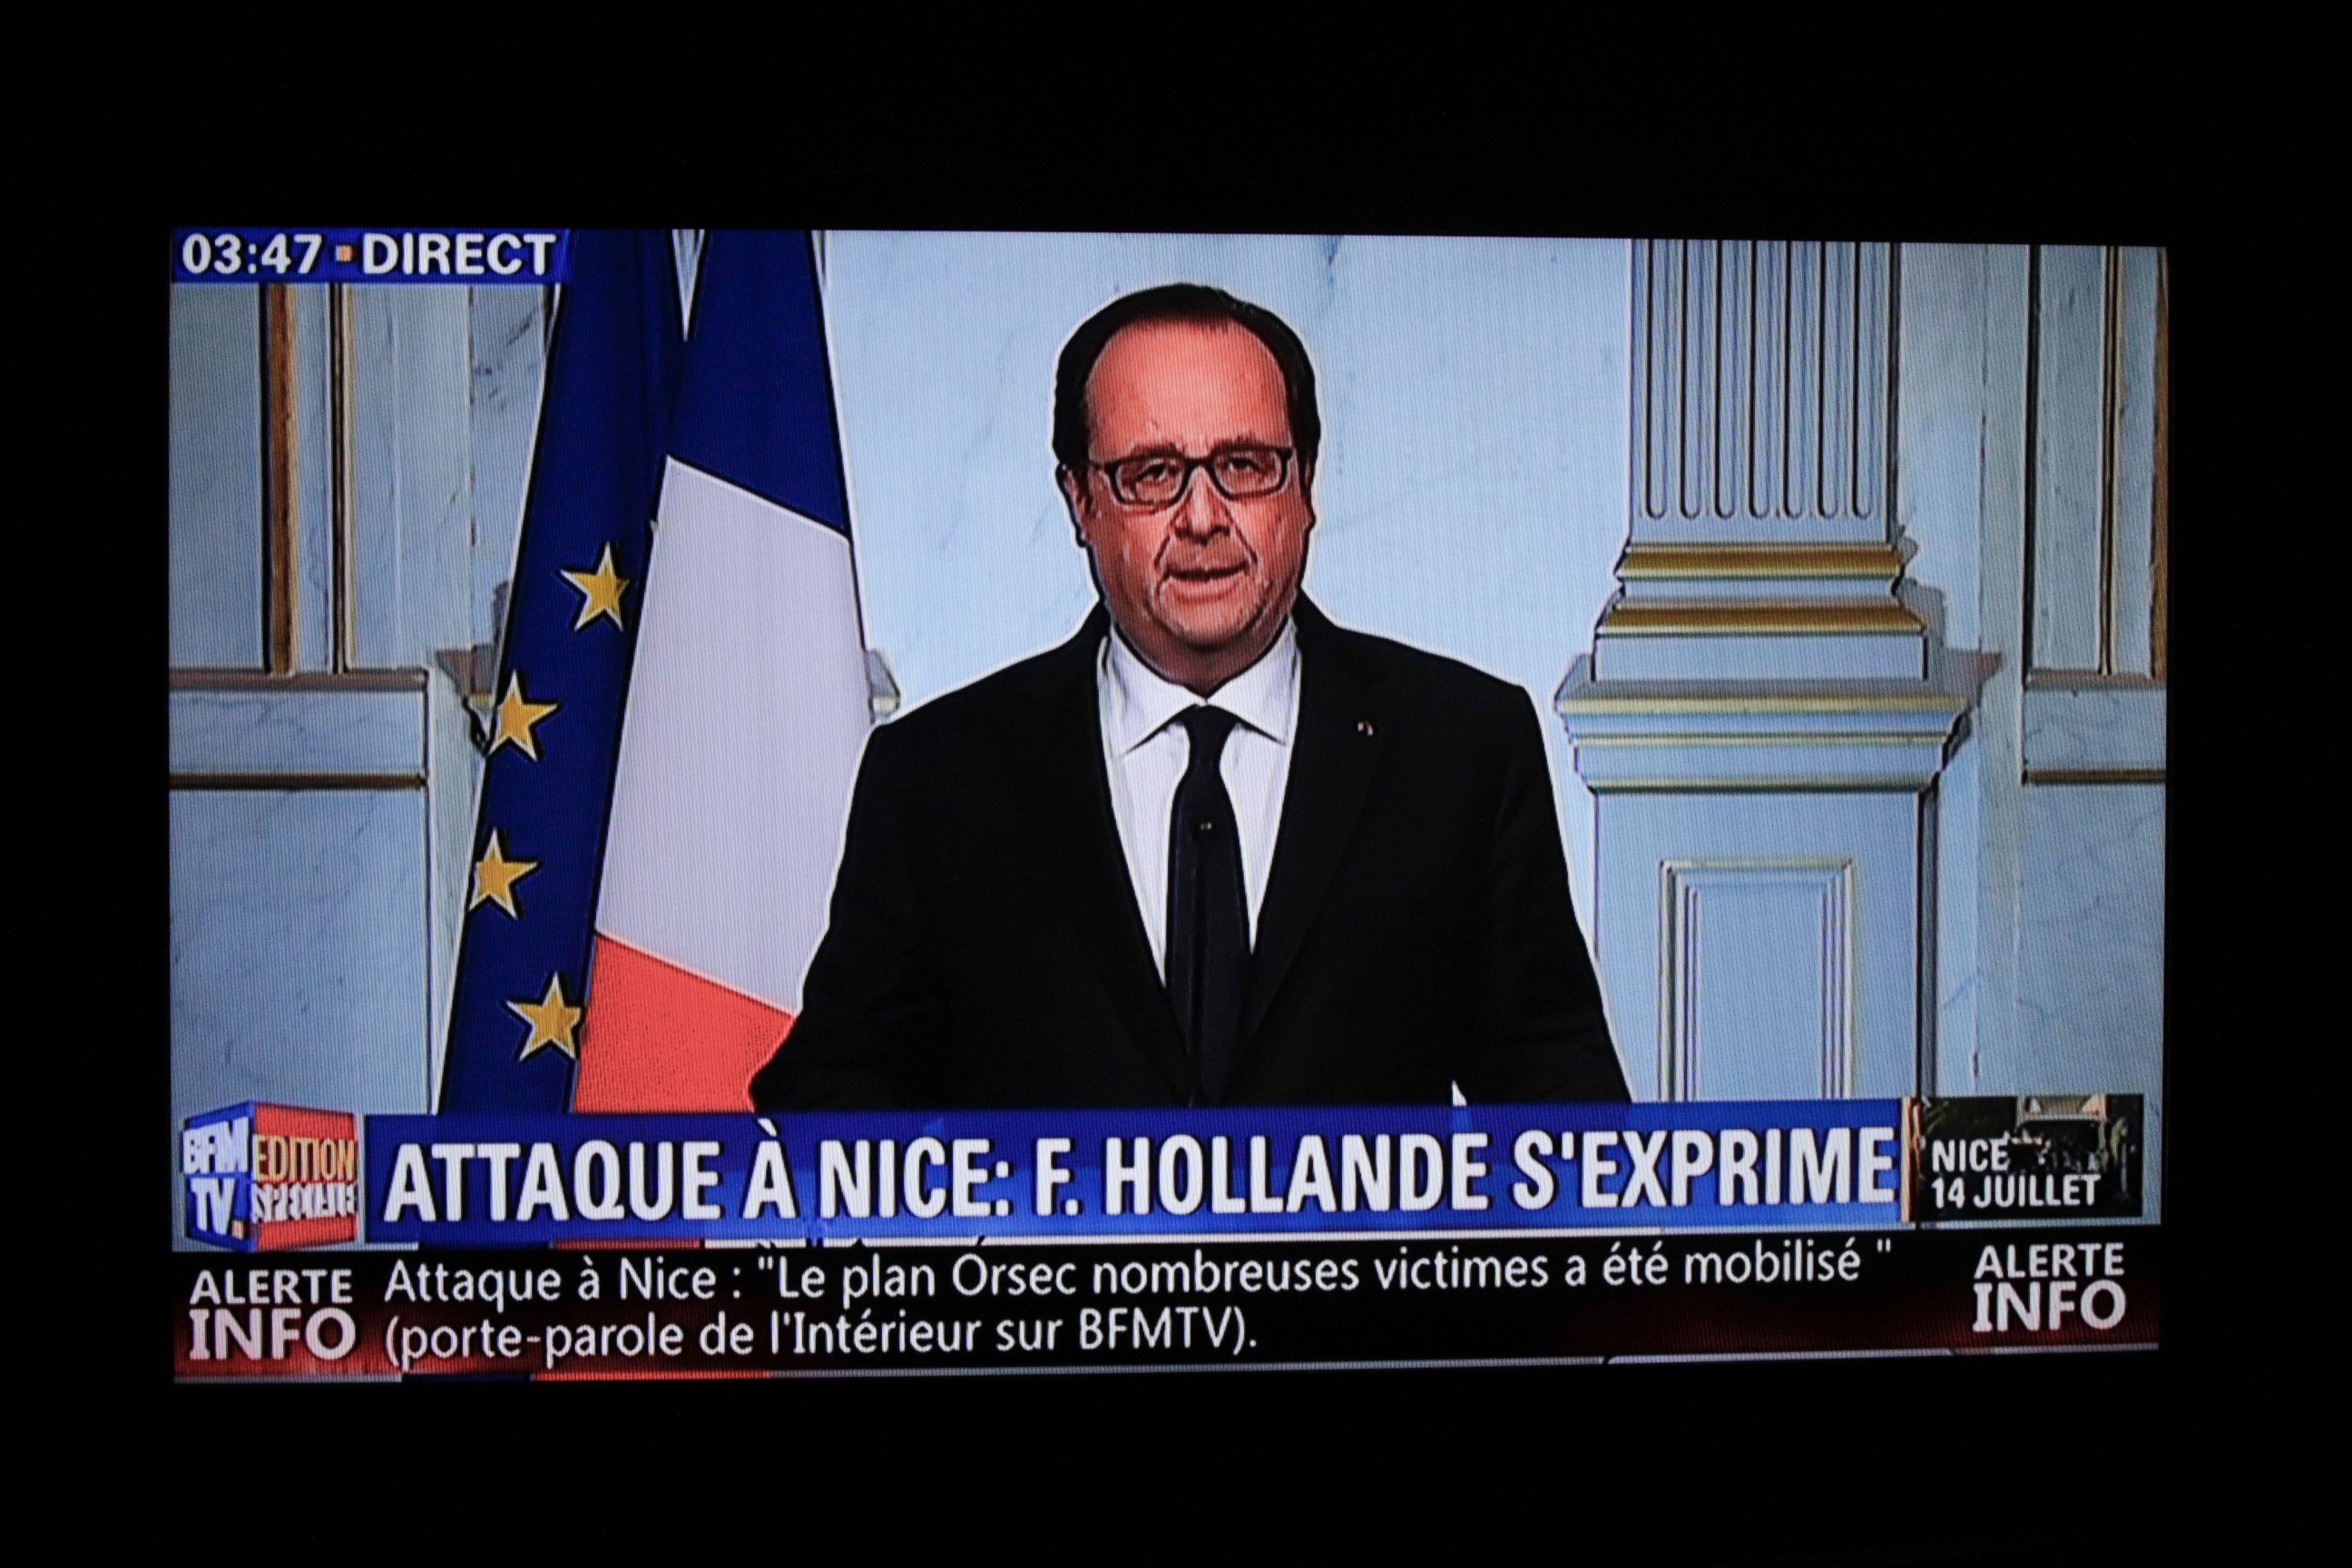 PHOTO: This still image from a BFM TV telecast shows French President Francois Hollande speaking about the attack in Nice on July 14, 2016 in Elysee, Paris. 
